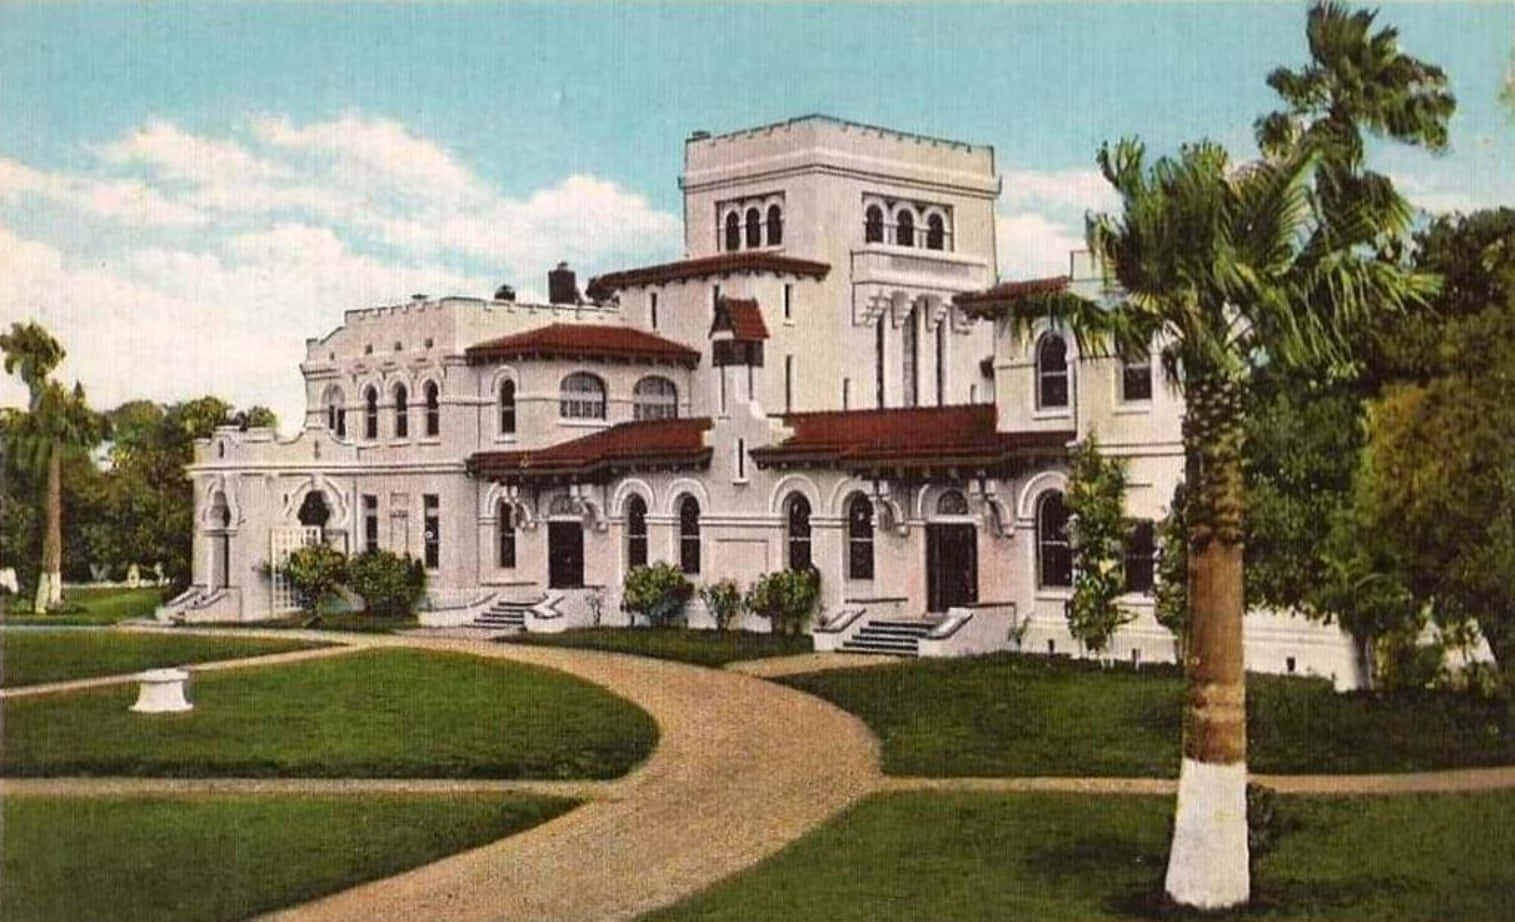 A Postcard Showing A Large White Building With Palm Trees